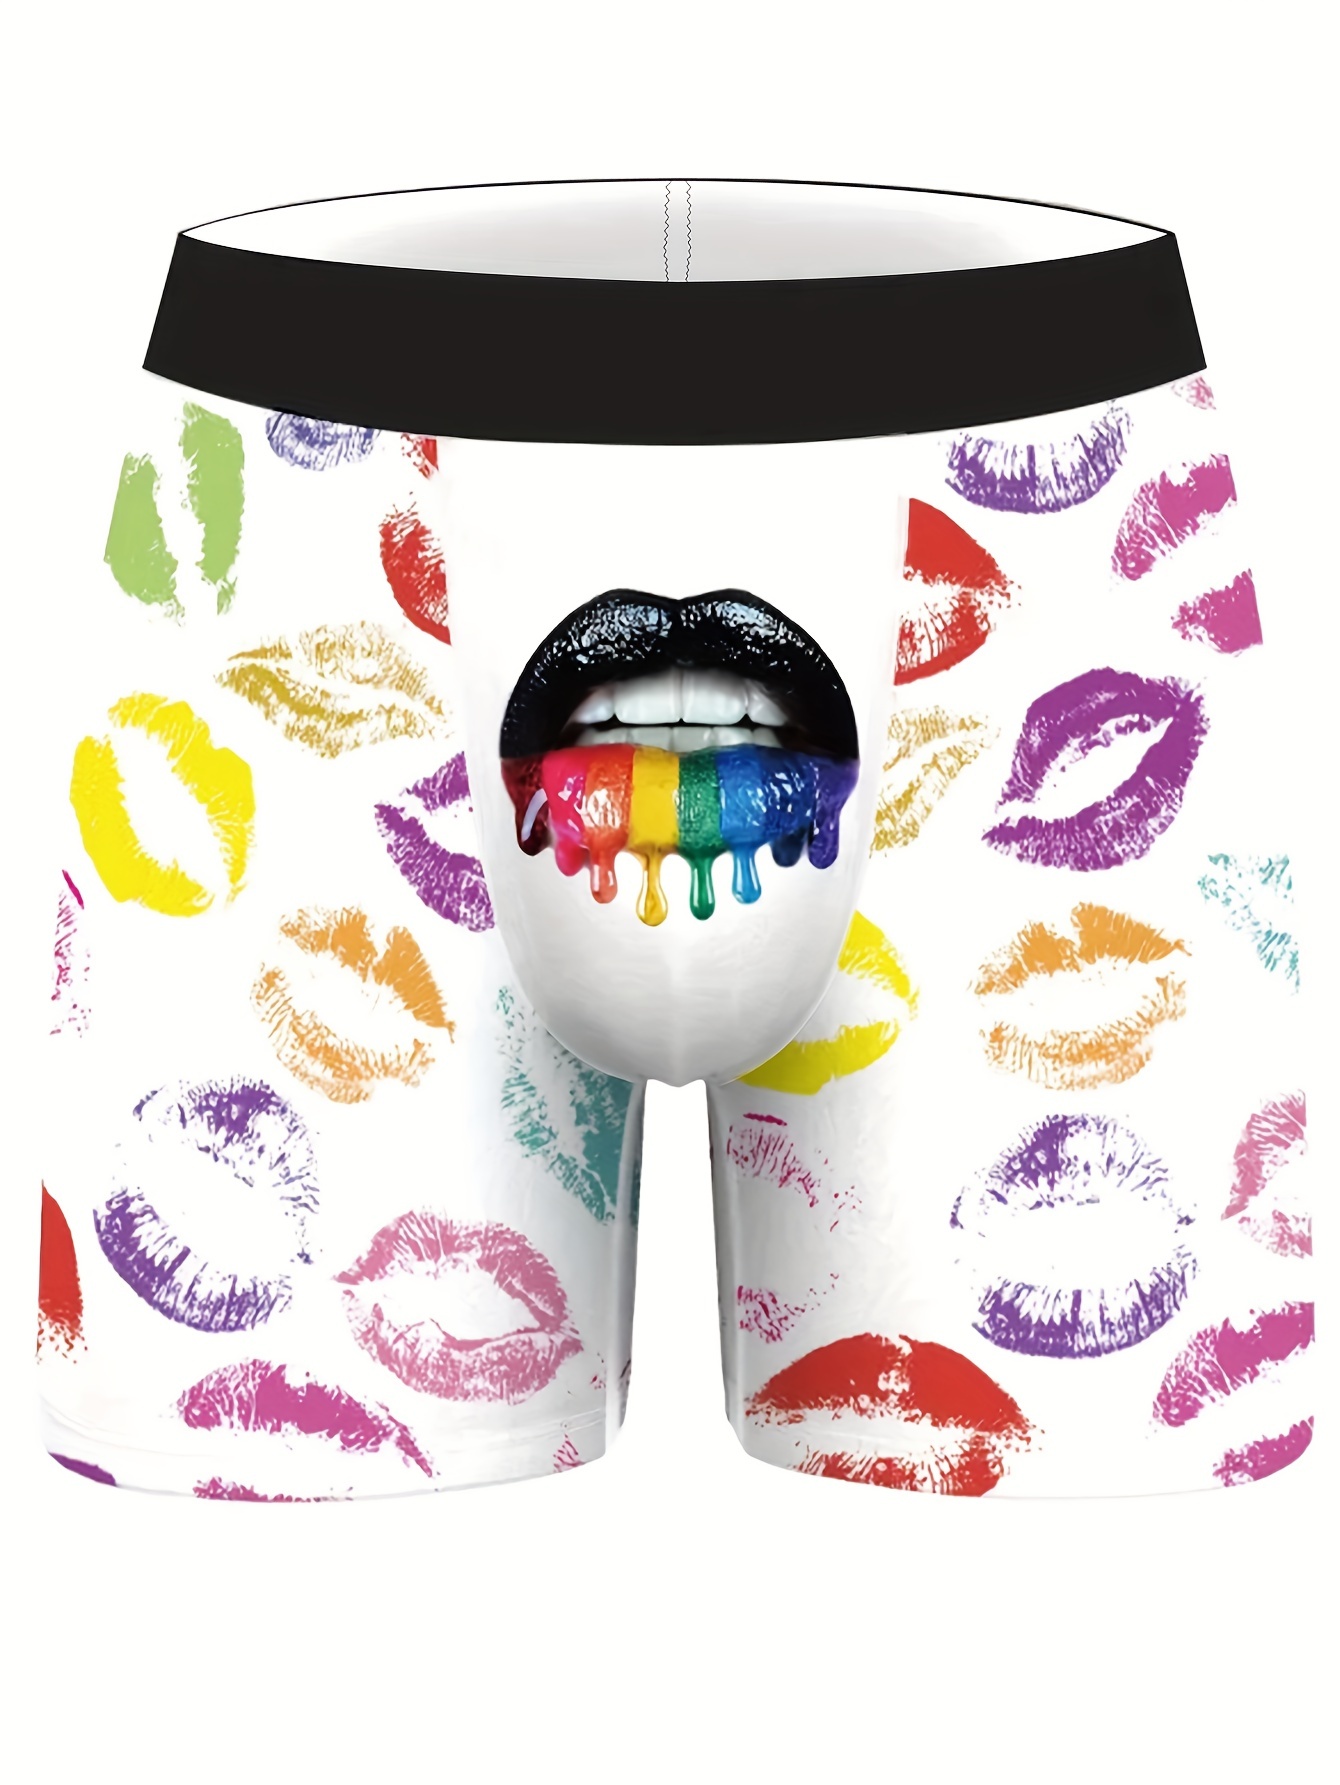 Plus Size Men's Colorful Lips Digital Print Fashion Novelty Boxer Brief  Shorts, Breathable Comfy Quick Drying Stretchy Boxer Trunks, Sports Trunks,  Me